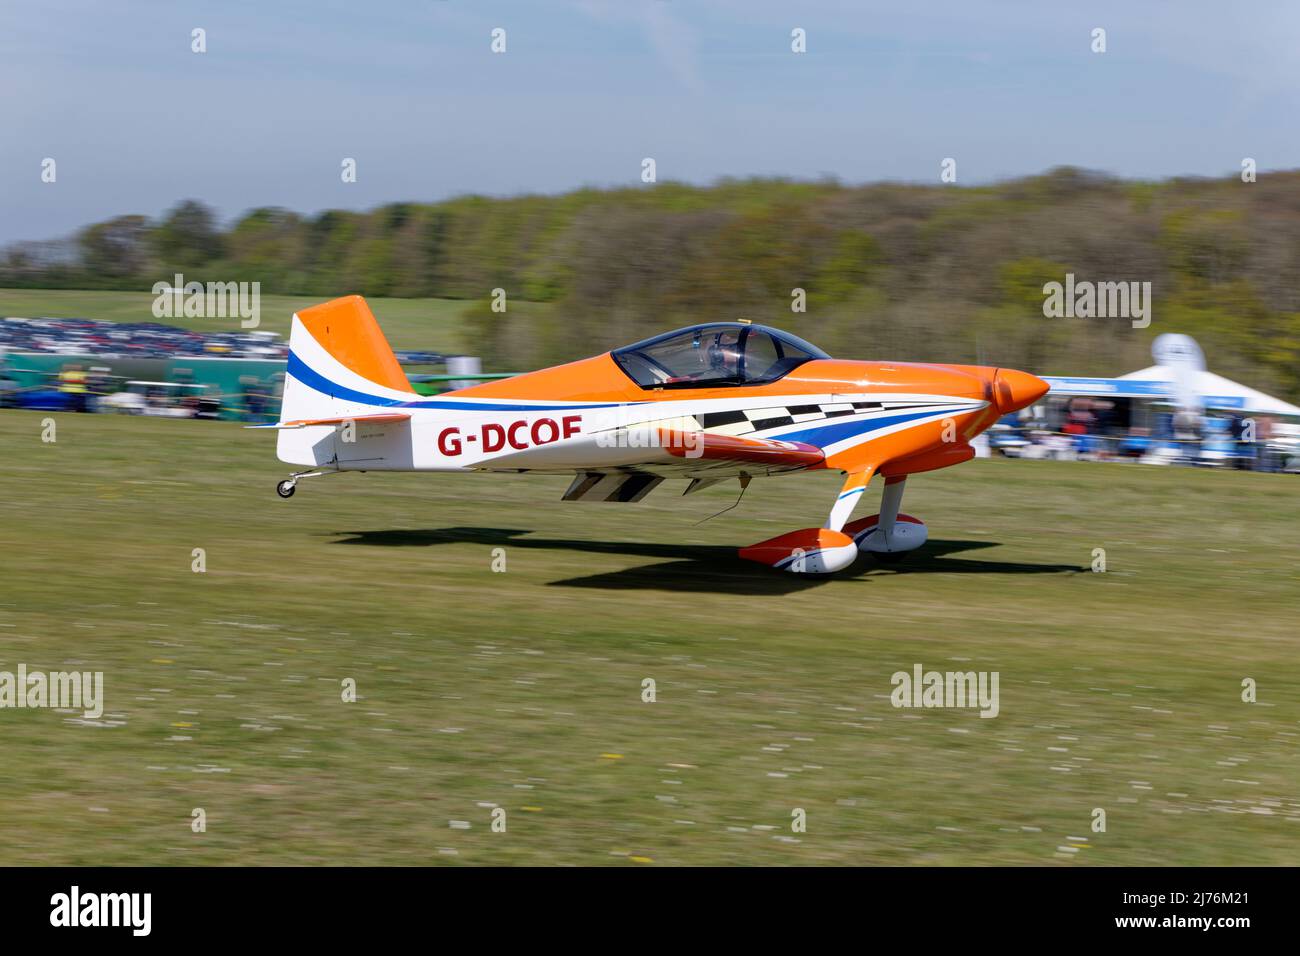 Beautiful Orange & White Vans RV-6 taildragger airplane G-DCOE arrives at Popham airfield in Hampshire England to attend the annual microlight fly-in Stock Photo